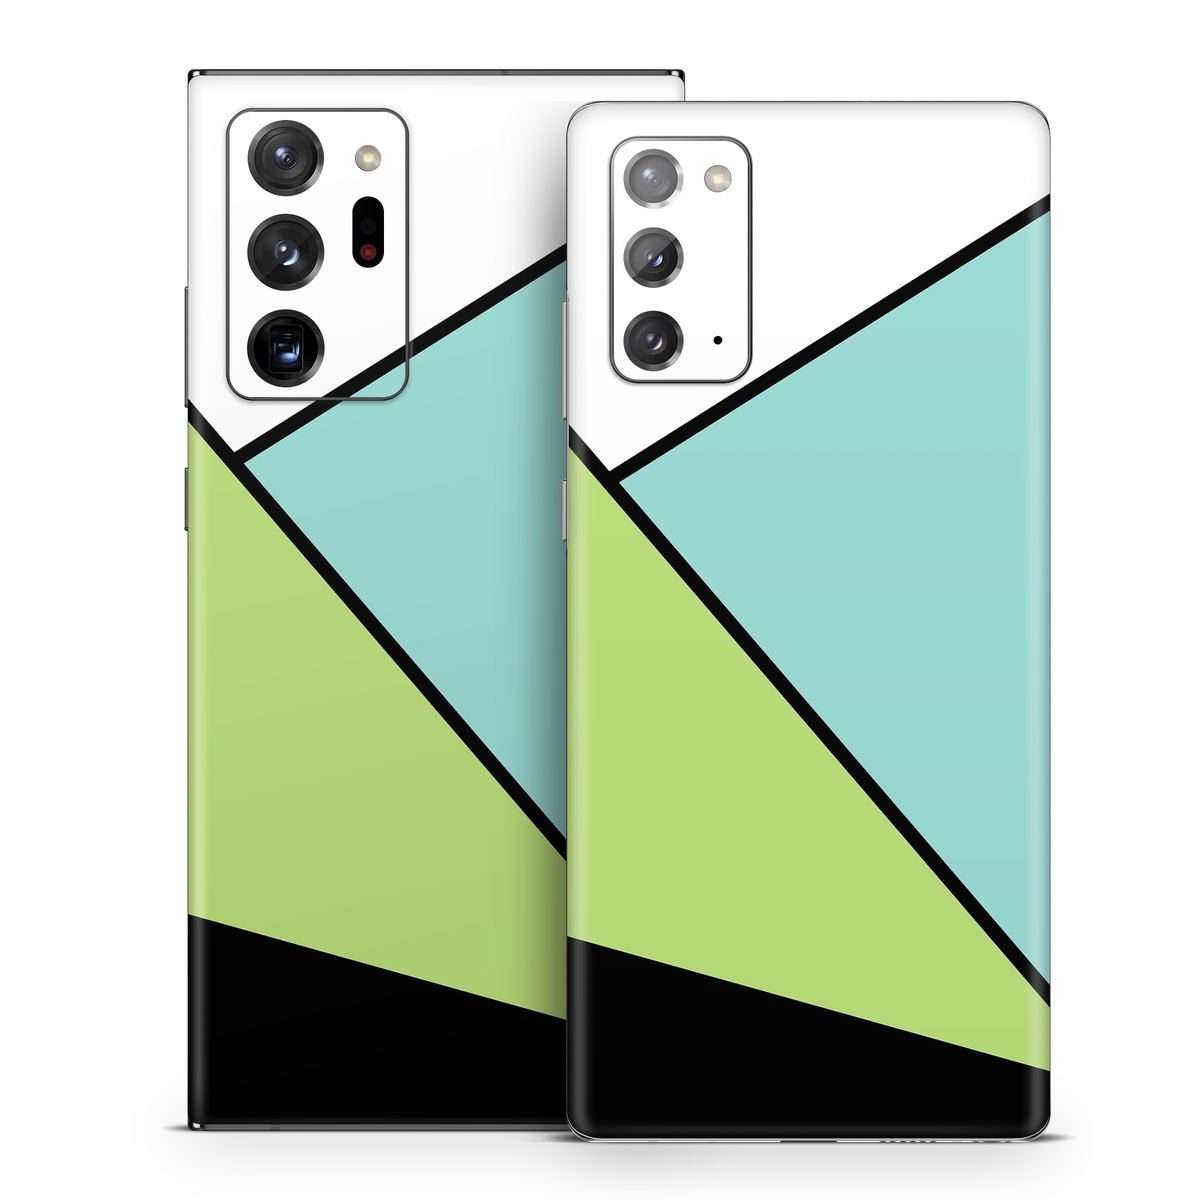 Samsung Galaxy Note 20 Series Skin design of Green, Line, Blue, Triangle, Design, Parallel, Pattern, Graphic design, Slope, with white, black, green, blue colors